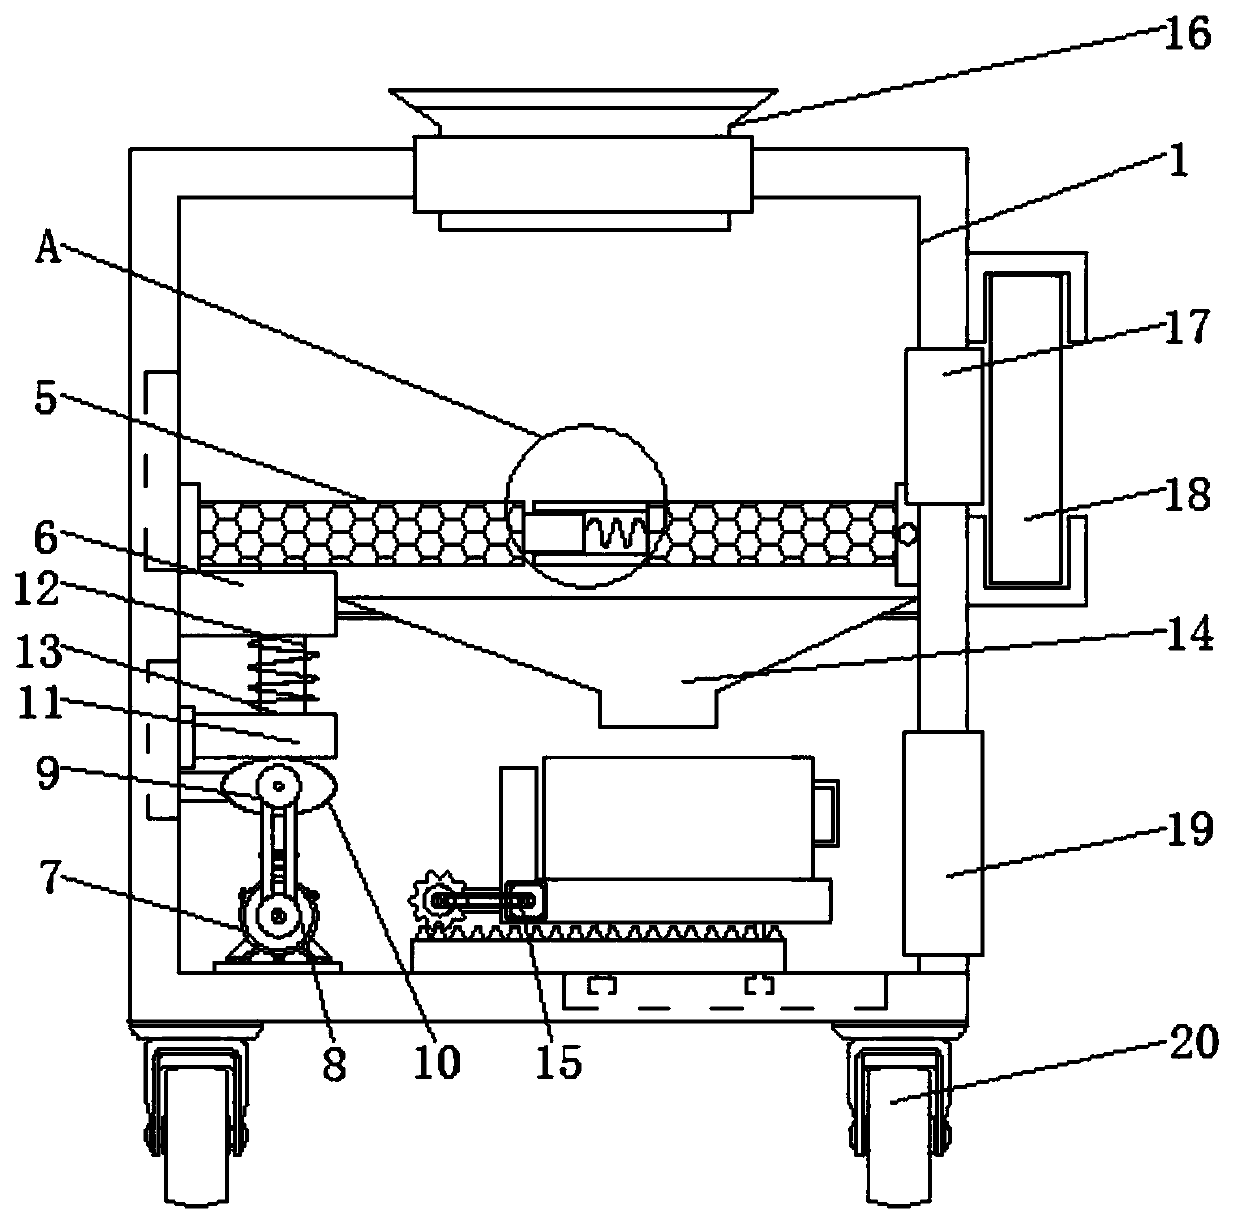 Powder screening device for rubber